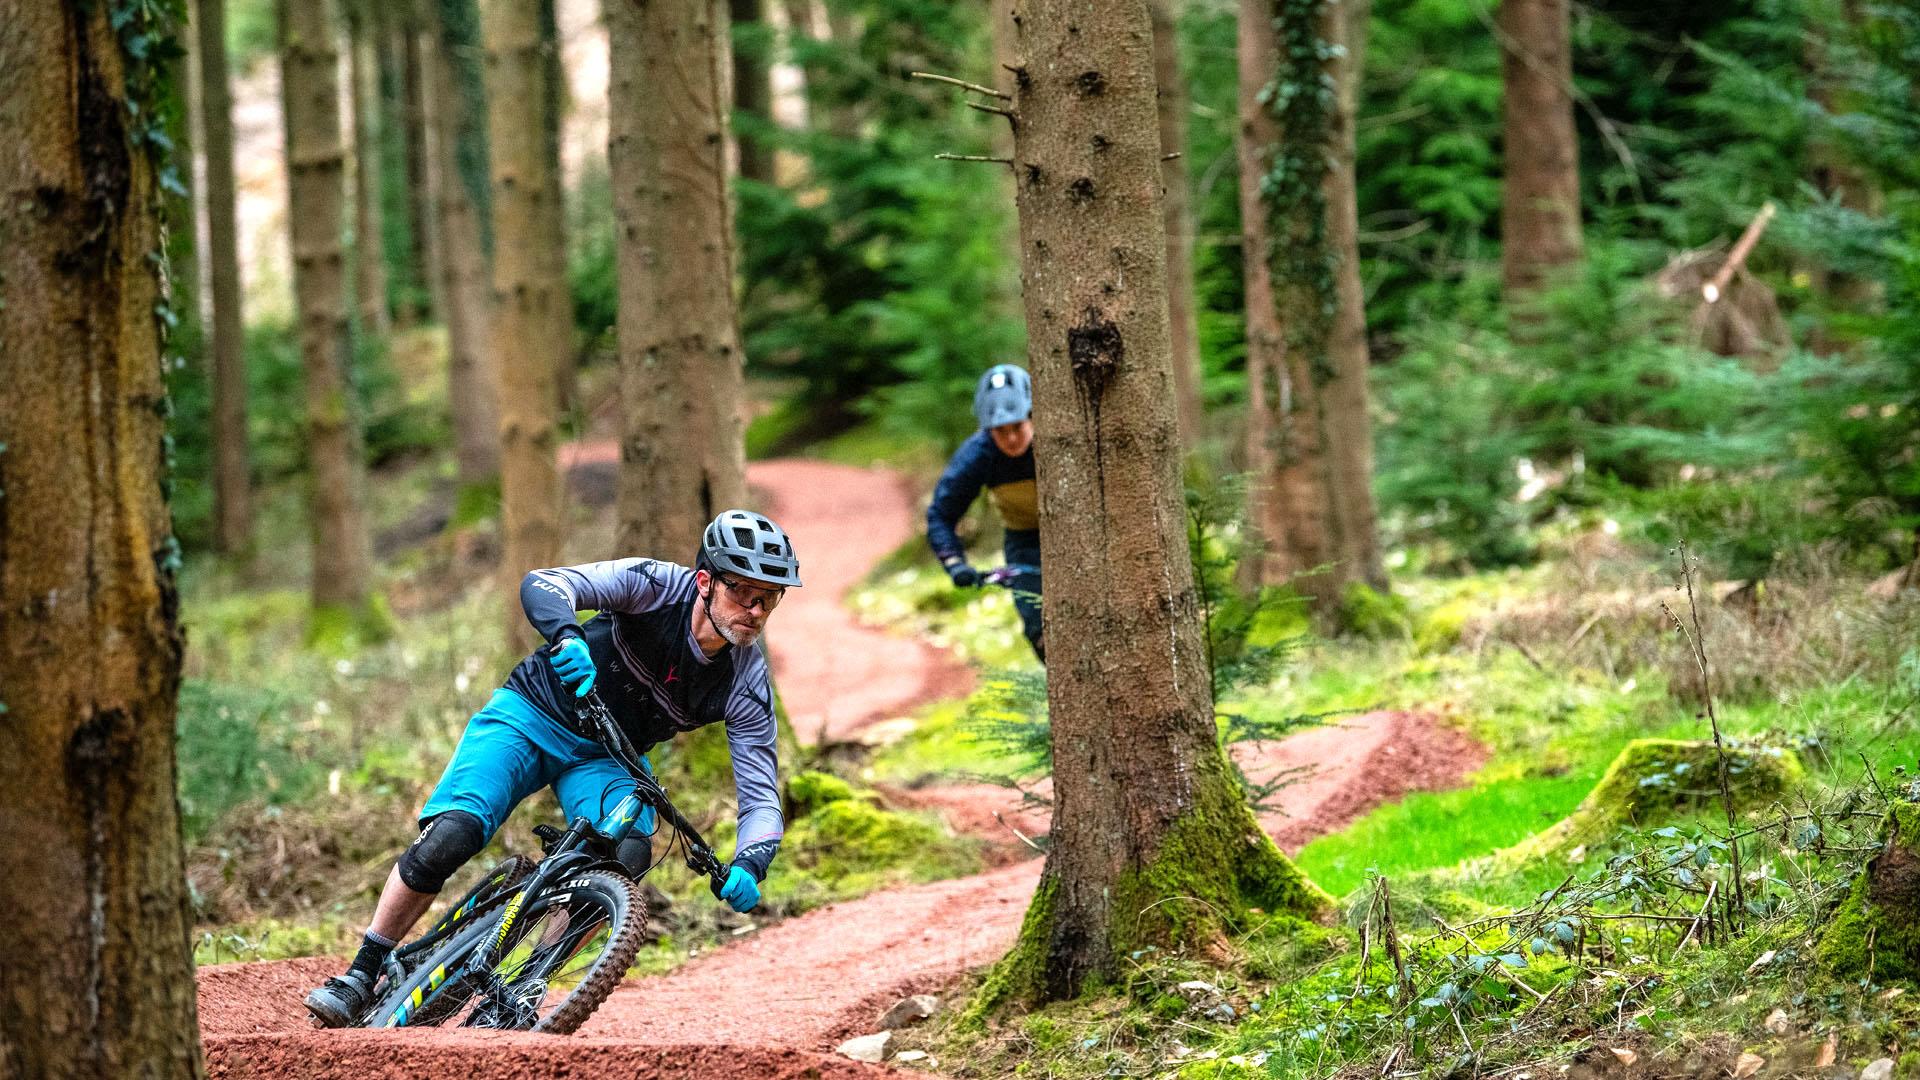 https://eu-assets.simpleview-europe.com/deanwye/imageresizer/?image=%2Fdbimgs%2FFDWV%20Gallery%20-%20Things%20To%20Do%20-%20Couple%20Mountain%20Biking%20in%20the%20Forest%20of%20Dean%20and%20Wye%20Valley%20credit%20Forestry%20England%202.jpg&action=FeaturedItemsScroll20193x2